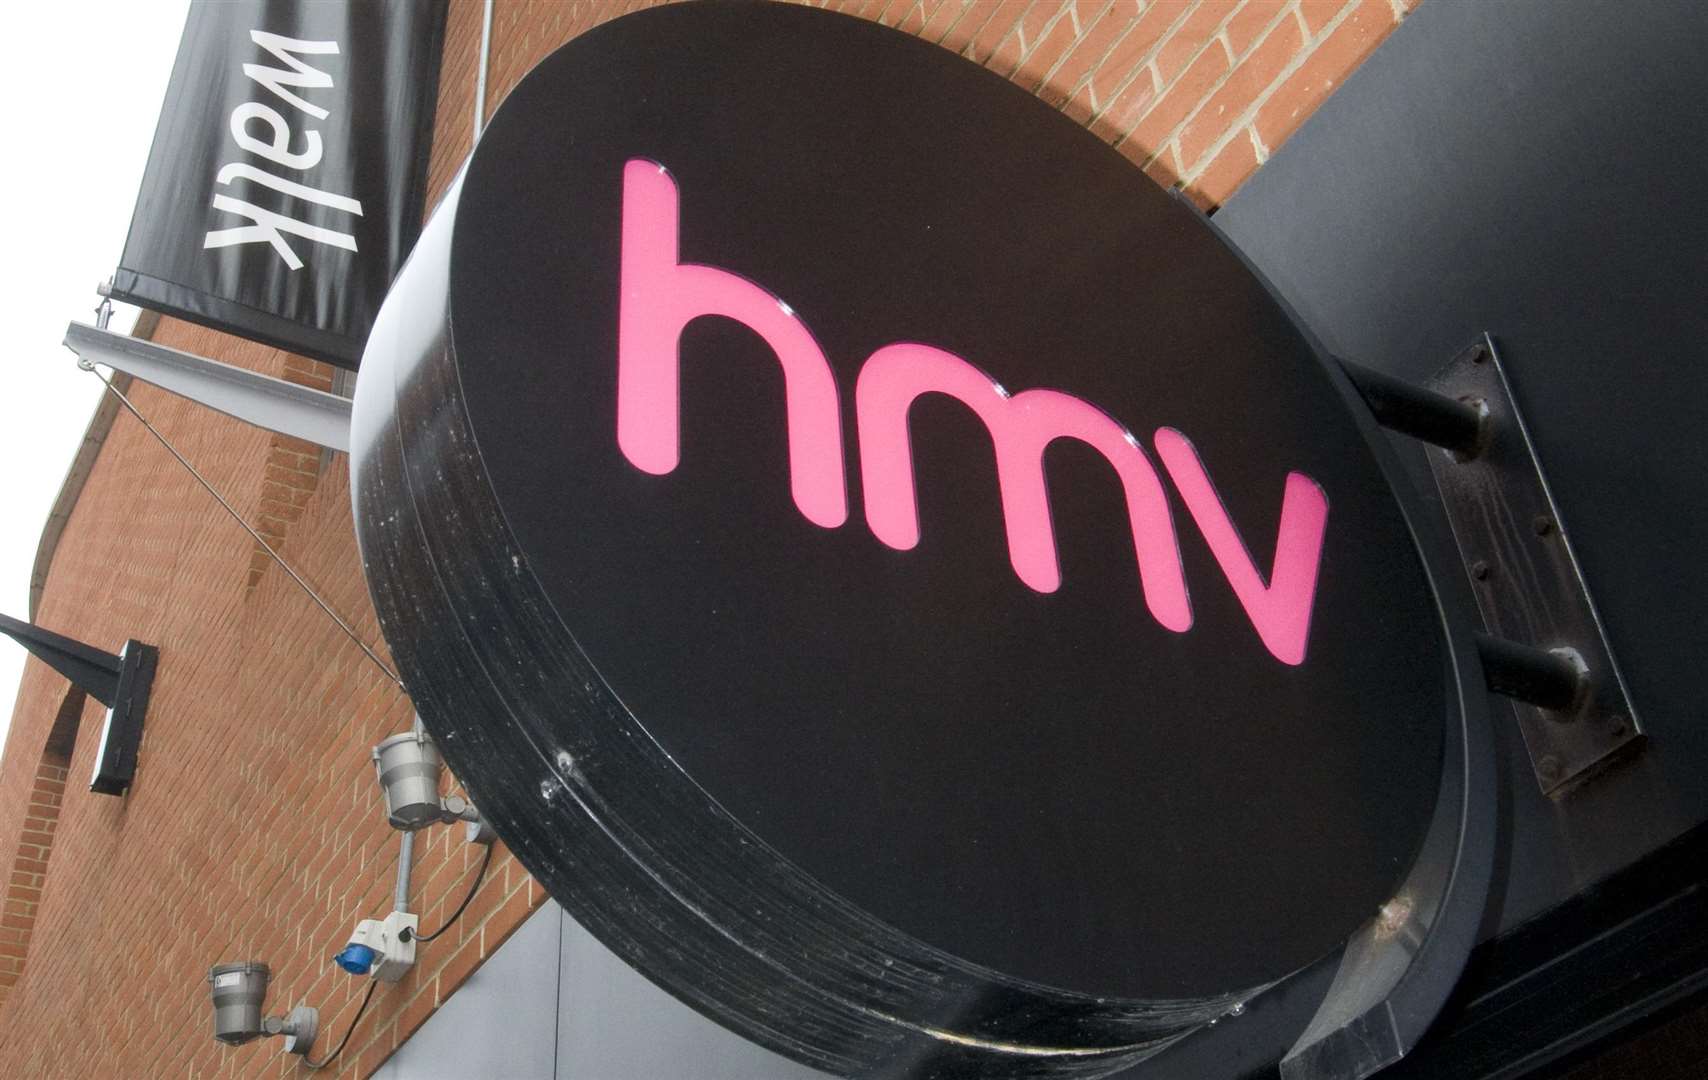 HMV in Maidstone is one of those at risk